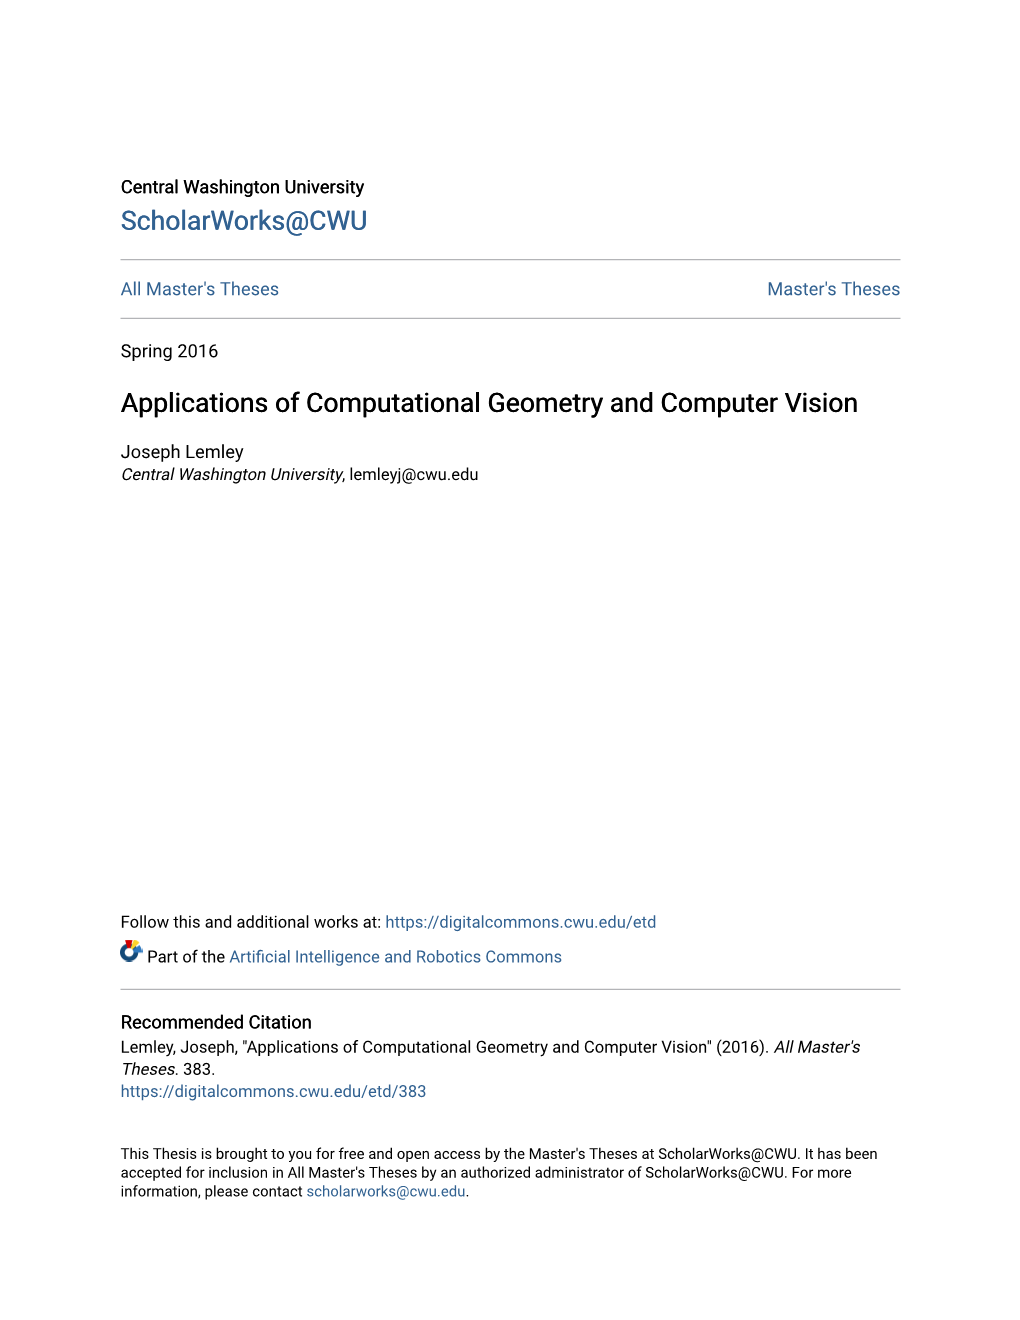 Applications of Computational Geometry and Computer Vision